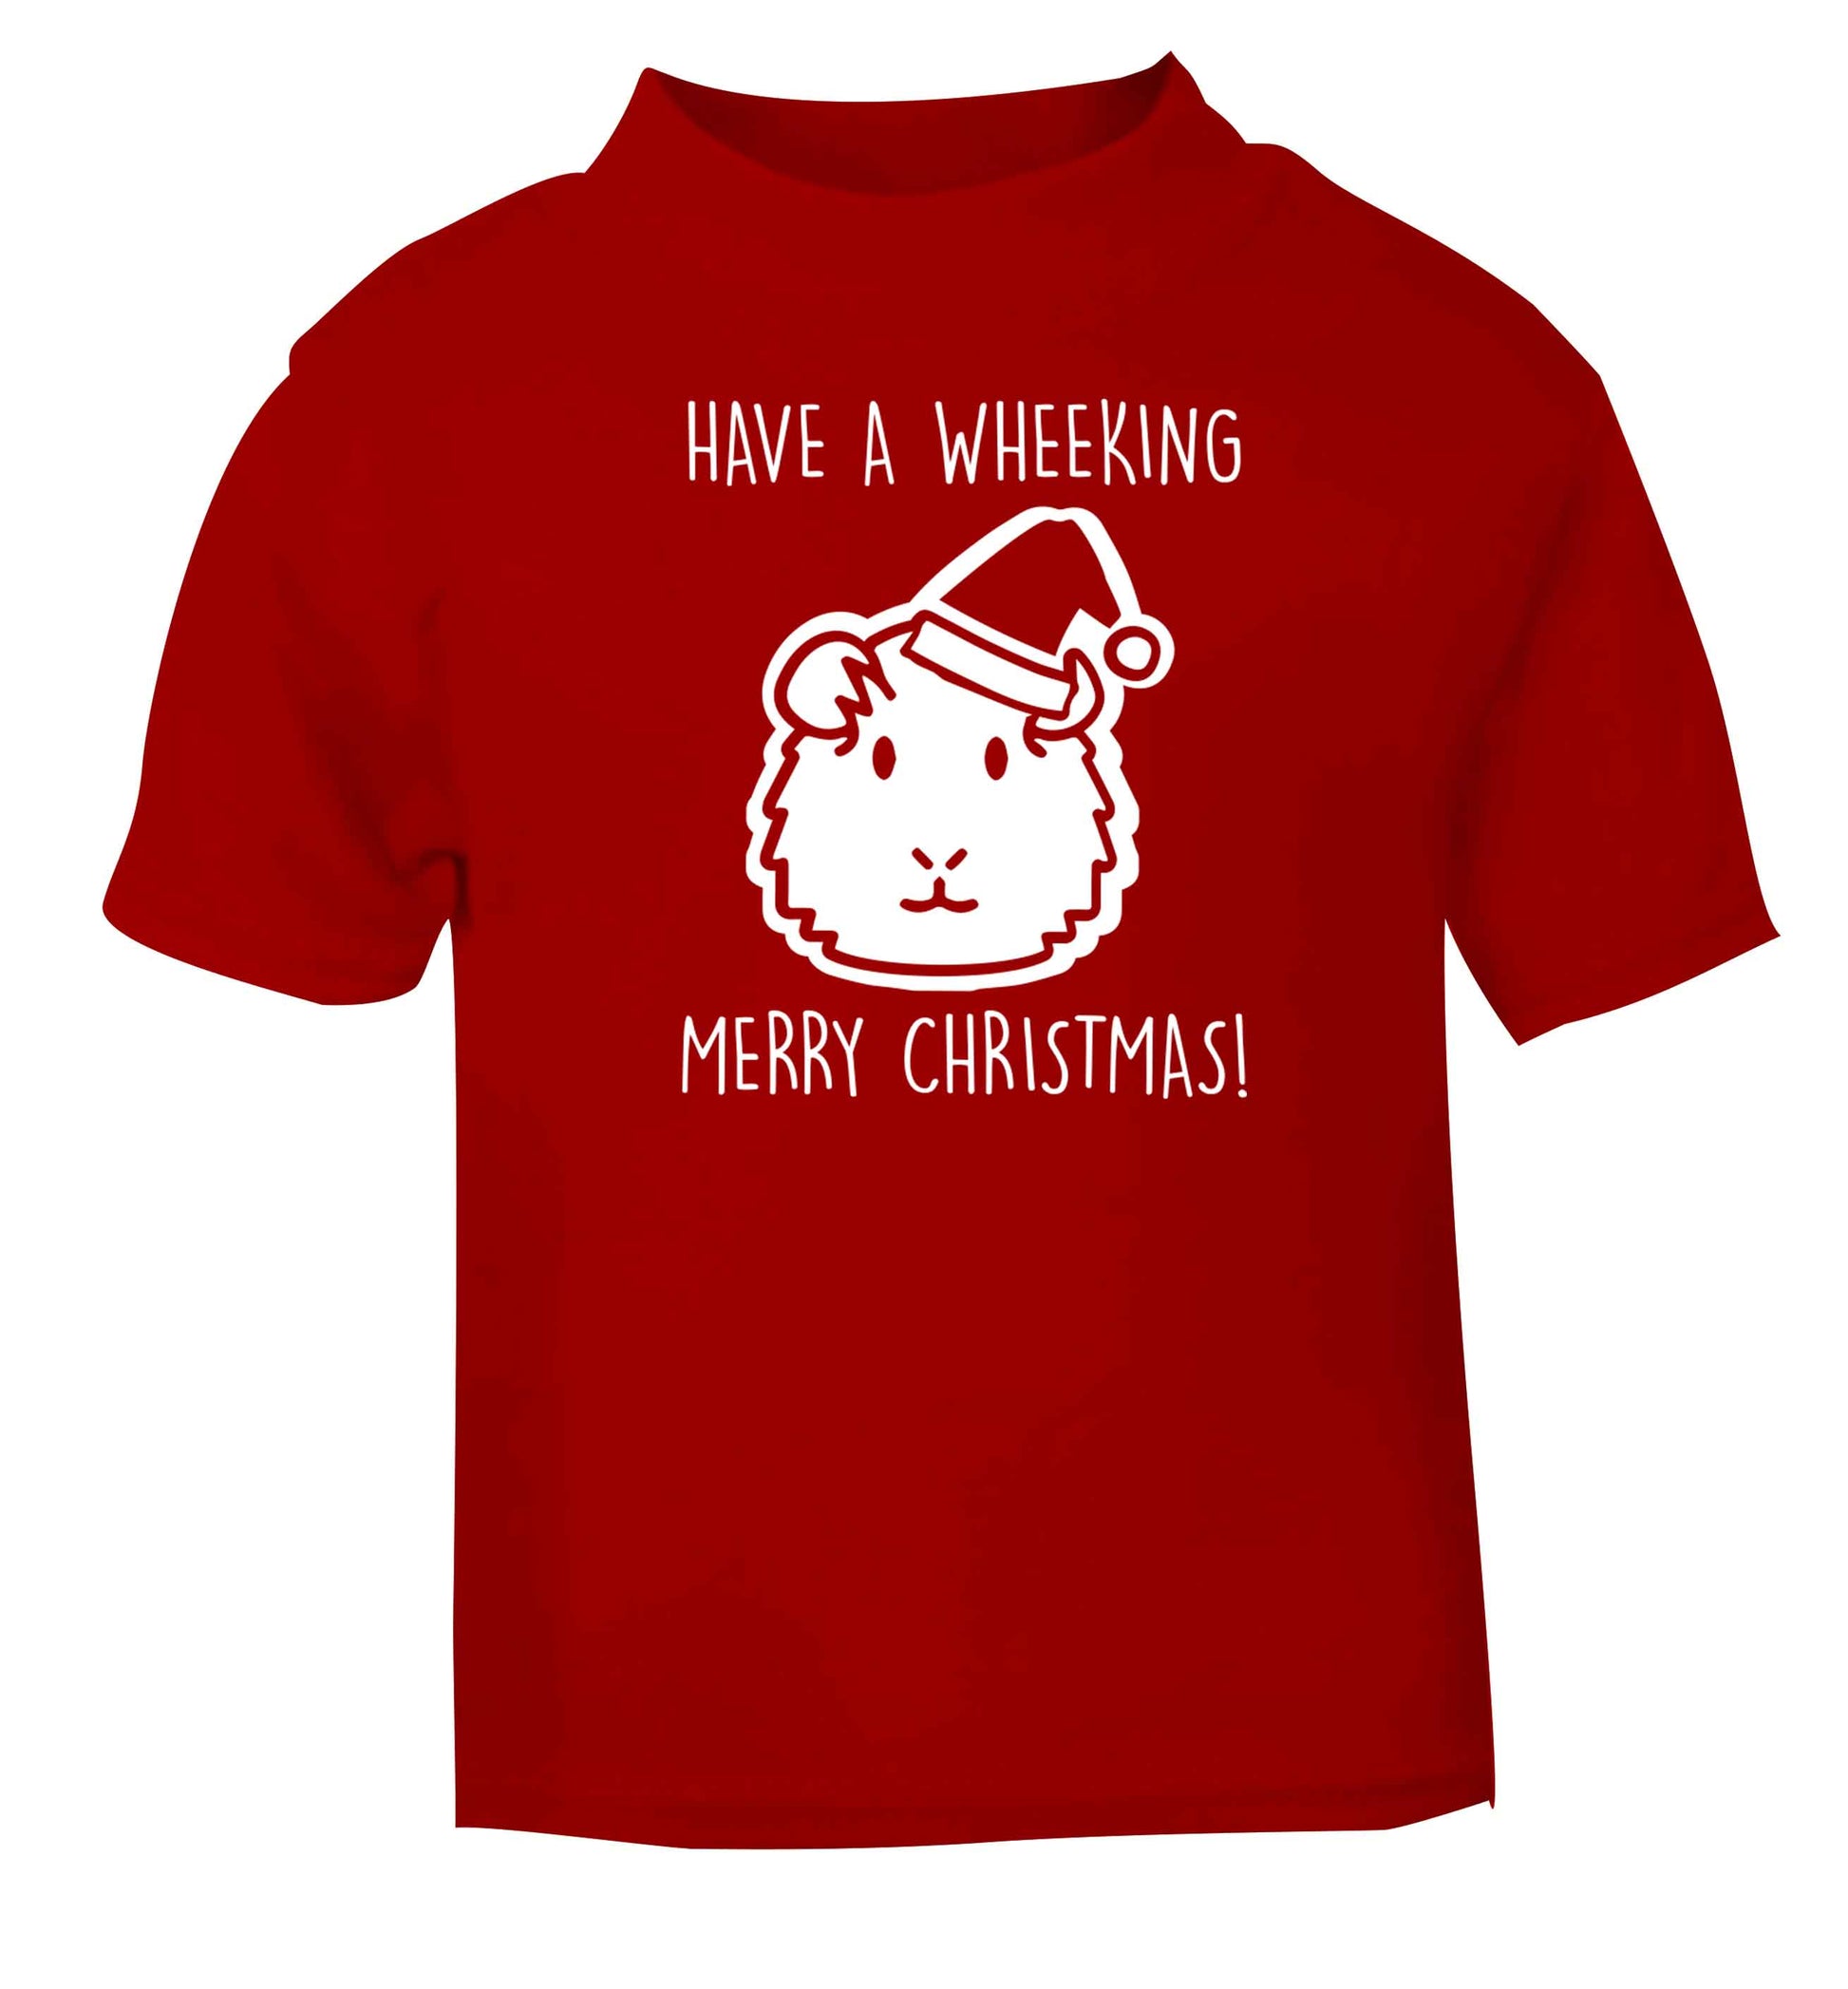 Have a wheeking merry Christmas red baby toddler Tshirt 2 Years